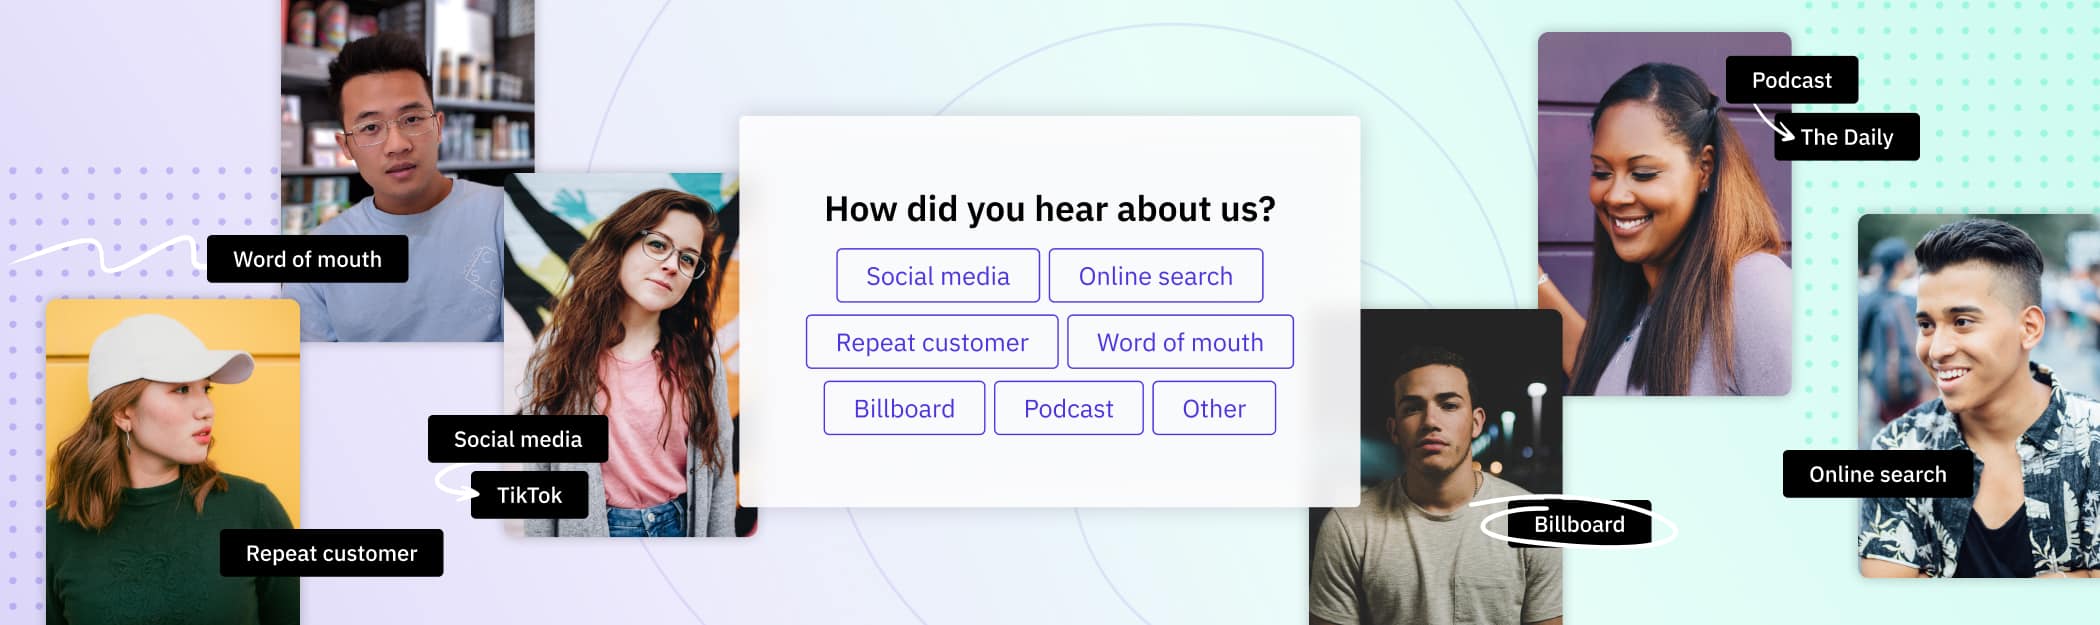 “How Did You Hear About Us?” (HDYHAU) Surveys: Optimize Marketing Spend by Uncovering Your Most Effective Channels